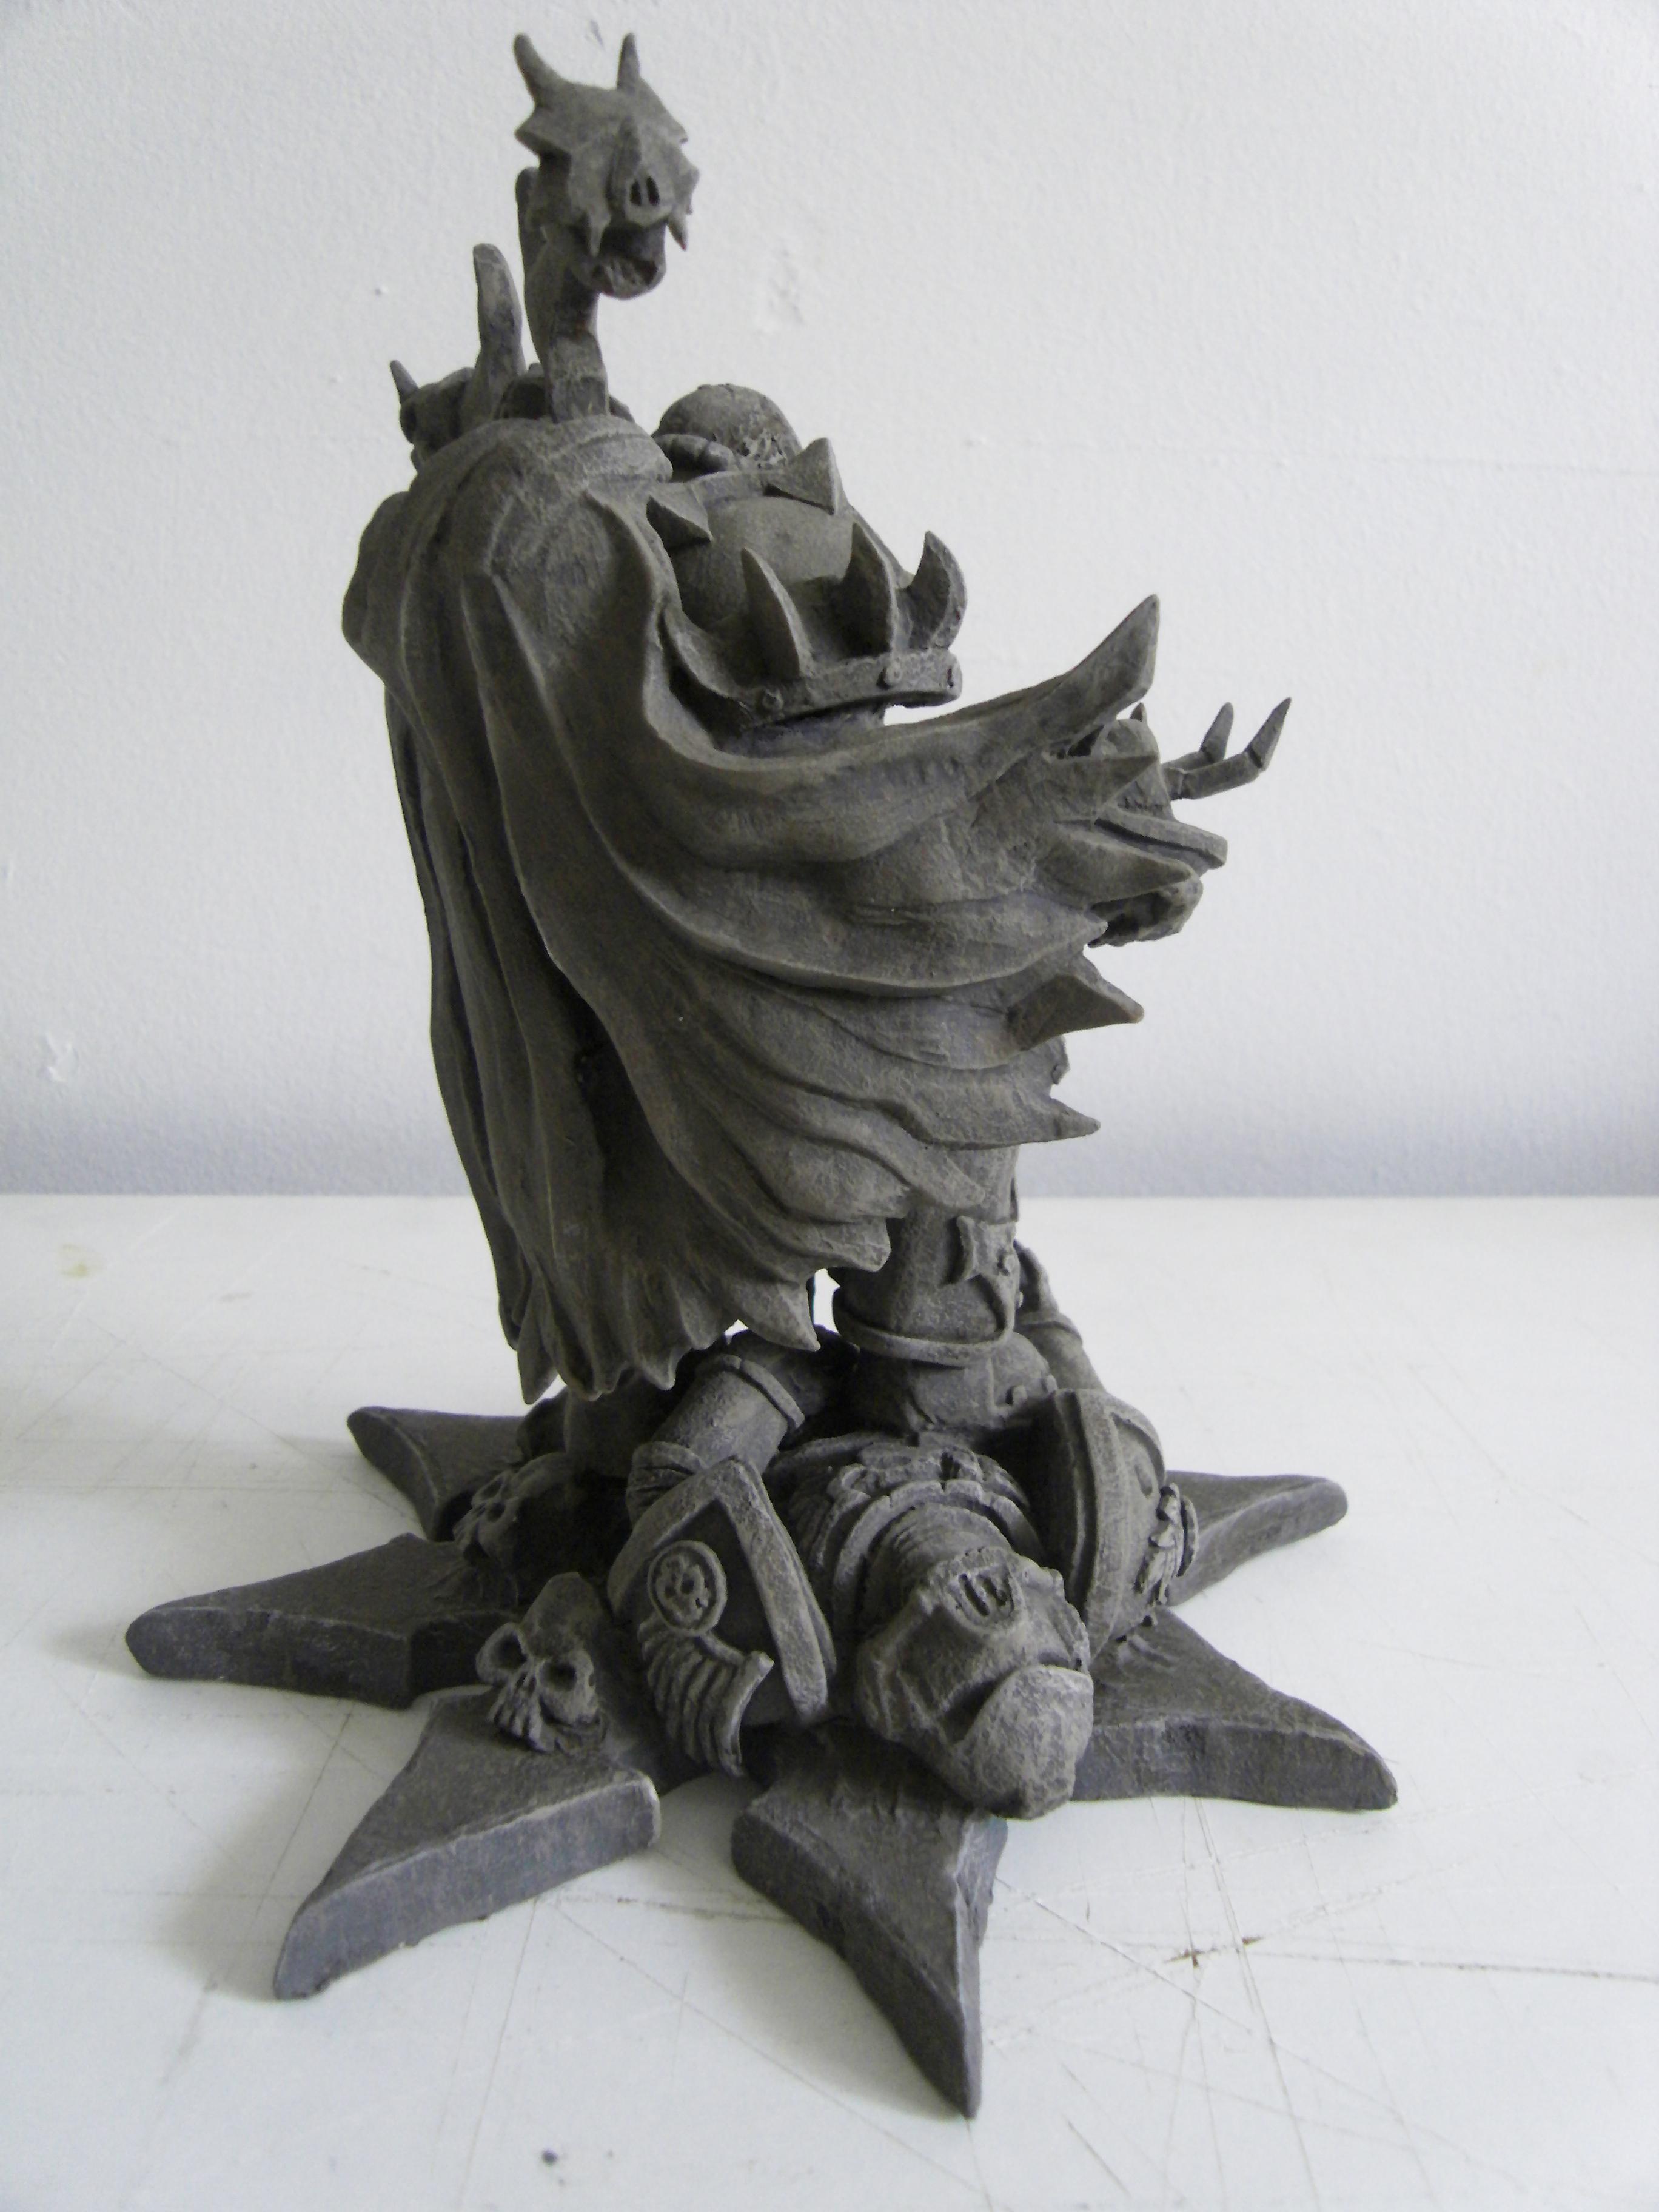 Chaos, Chaos Lord, Chaos Space Marines, Commission Work, Custom, Large, Large Scale, Monument, Scratch Build, Sculpting, Sculpture, Space Marines, Statue, Terrain, Warhammer 40,000, Warhammer Fantasy